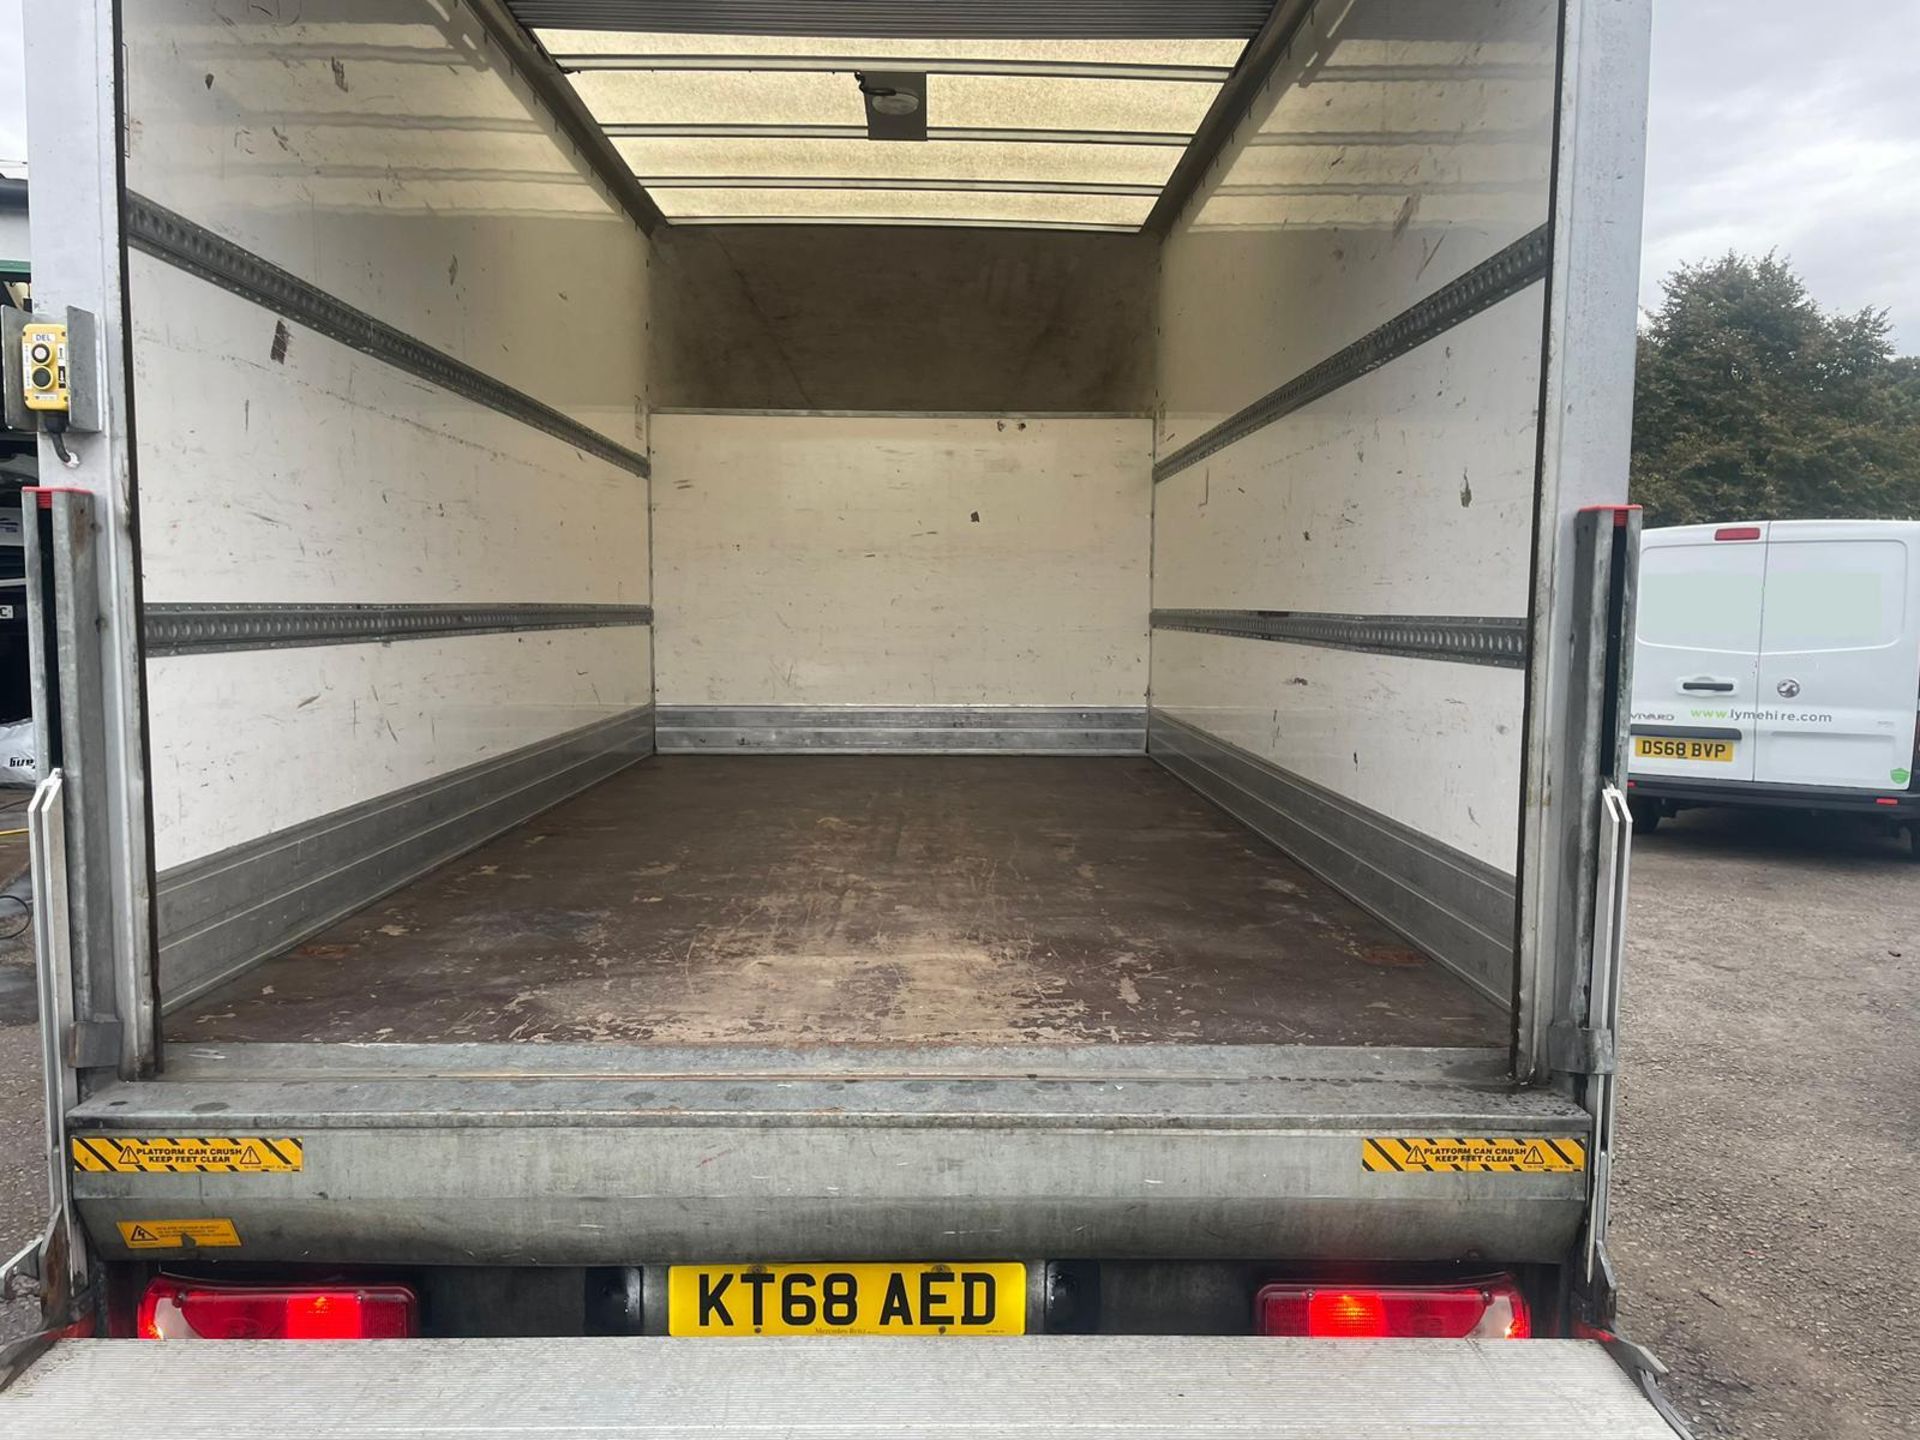 2018 MERCEDES SPRINTER 314 CDTI LUTON WITH TAIL LIFT - 108,356 WARRANTED MILES - 2.2 EURO 6 ENGINE  - Image 4 of 10